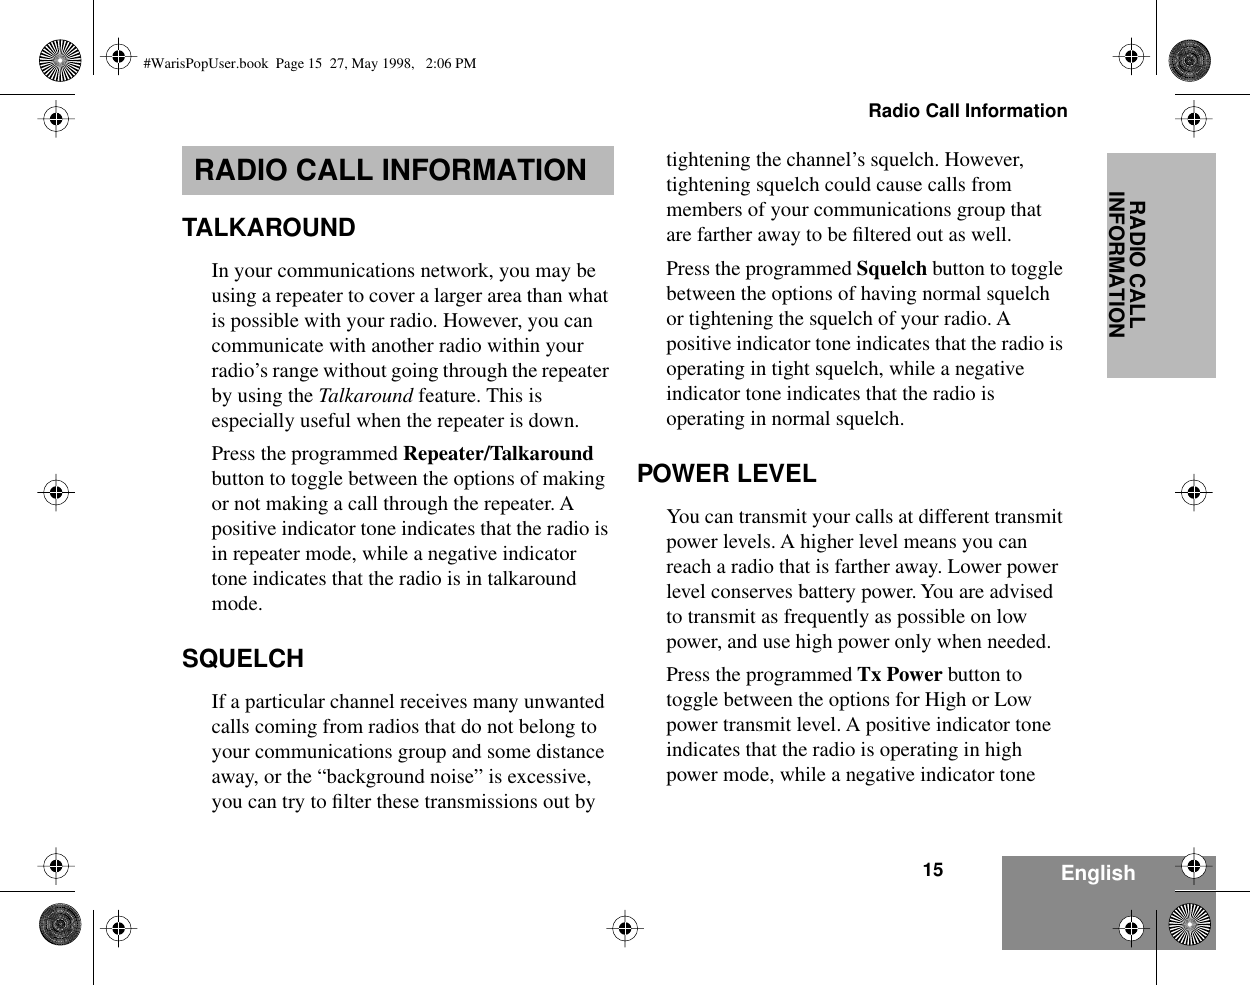  15Radio Call Information EnglishRADIO CALL INFORMATION RADIO CALL INFORMATION TALKAROUND In your communications network, you may be using a repeater to cover a larger area than what is possible with your radio. However, you can communicate with another radio within your radio’s range without going through the repeater by using the  Talkaround  feature. This is especially useful when the repeater is down. Press the programmed  Repeater/Talkaround  button to toggle between the options of making or not making a call through the repeater. A positive indicator tone indicates that the radio is in repeater mode, while a negative indicator tone indicates that the radio is in talkaround mode. SQUELCH If a particular channel receives many unwanted calls coming from radios that do not belong to your communications group and some distance away, or the “background noise” is excessive, you can try to ﬁlter these transmissions out by tightening the channel’s squelch. However, tightening squelch could cause calls from members of your communications group that are farther away to be ﬁltered out as well.Press the programmed  Squelch  button to toggle between the options of having normal squelch or tightening the squelch of your radio. A positive indicator tone indicates that the radio is operating in tight squelch, while a negative indicator tone indicates that the radio is operating in normal squelch. POWER LEVEL You can transmit your calls at different transmit power levels. A higher level means you can reach a radio that is farther away. Lower power level conserves battery power. You are advised to transmit as frequently as possible on low power, and use high power only when needed. Press the programmed  Tx Power  button to toggle between the options for High or Low power transmit level. A positive indicator tone indicates that the radio is operating in high power mode, while a negative indicator tone  #WarisPopUser.book  Page 15  27, May 1998,   2:06 PM